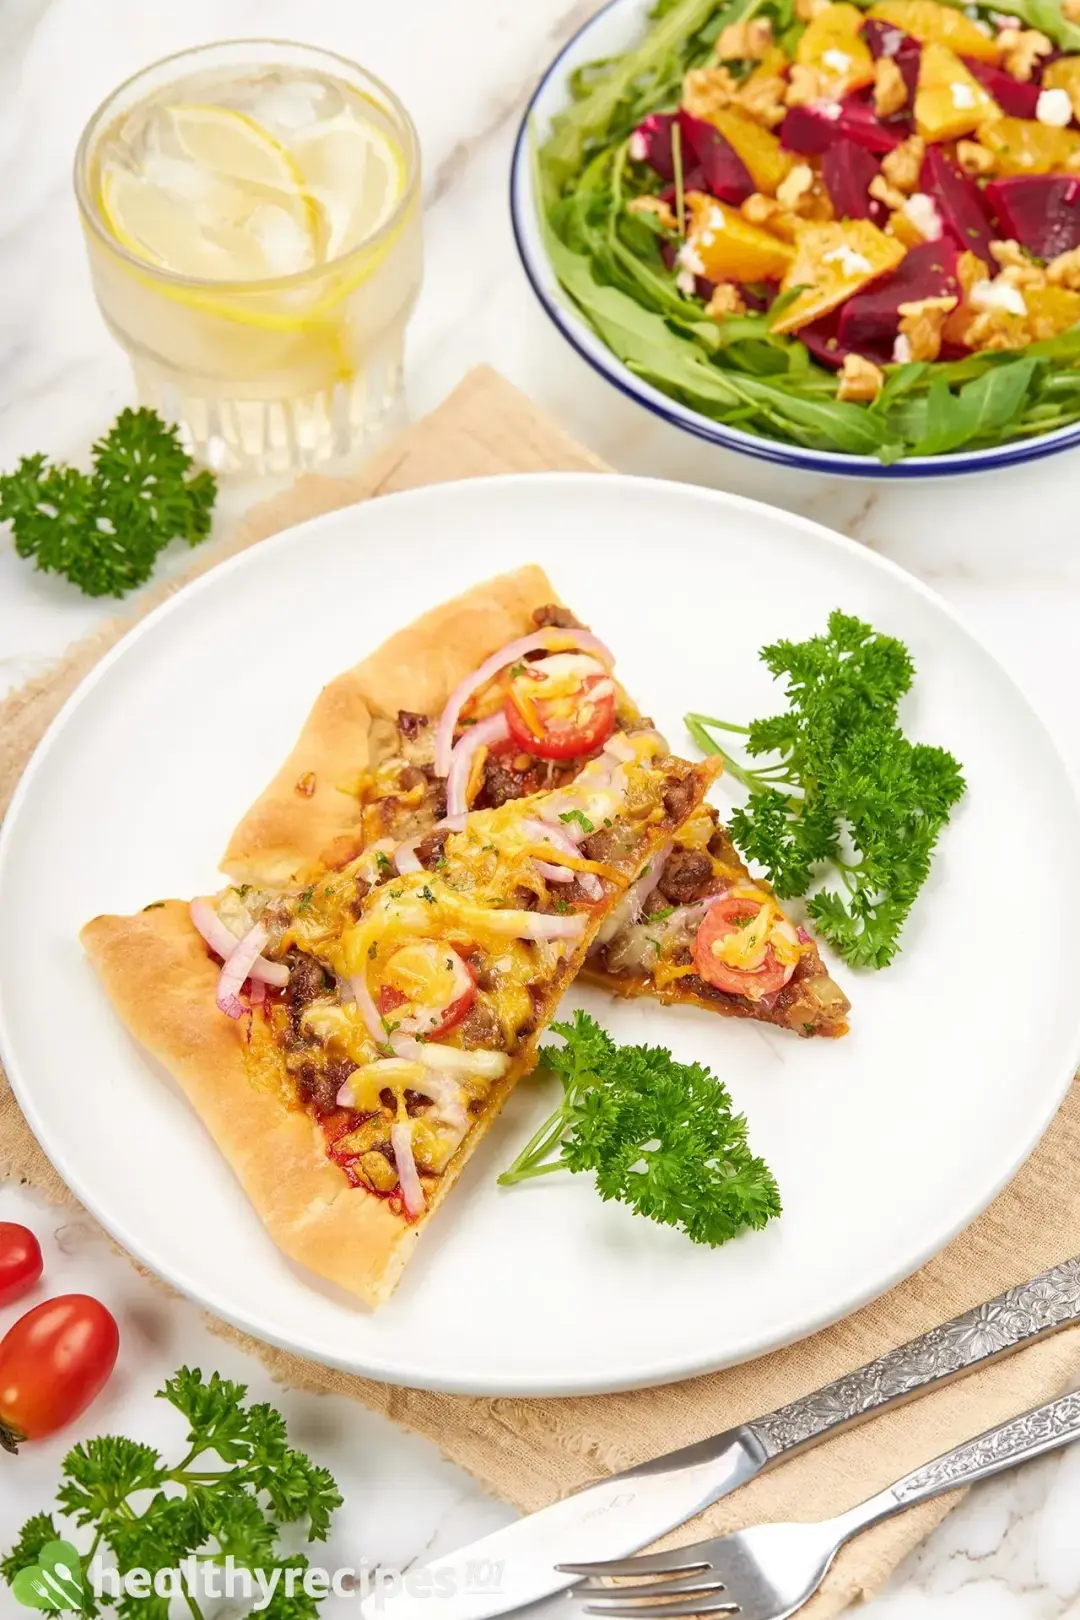 What to Serve With Cheeseburger Pizza